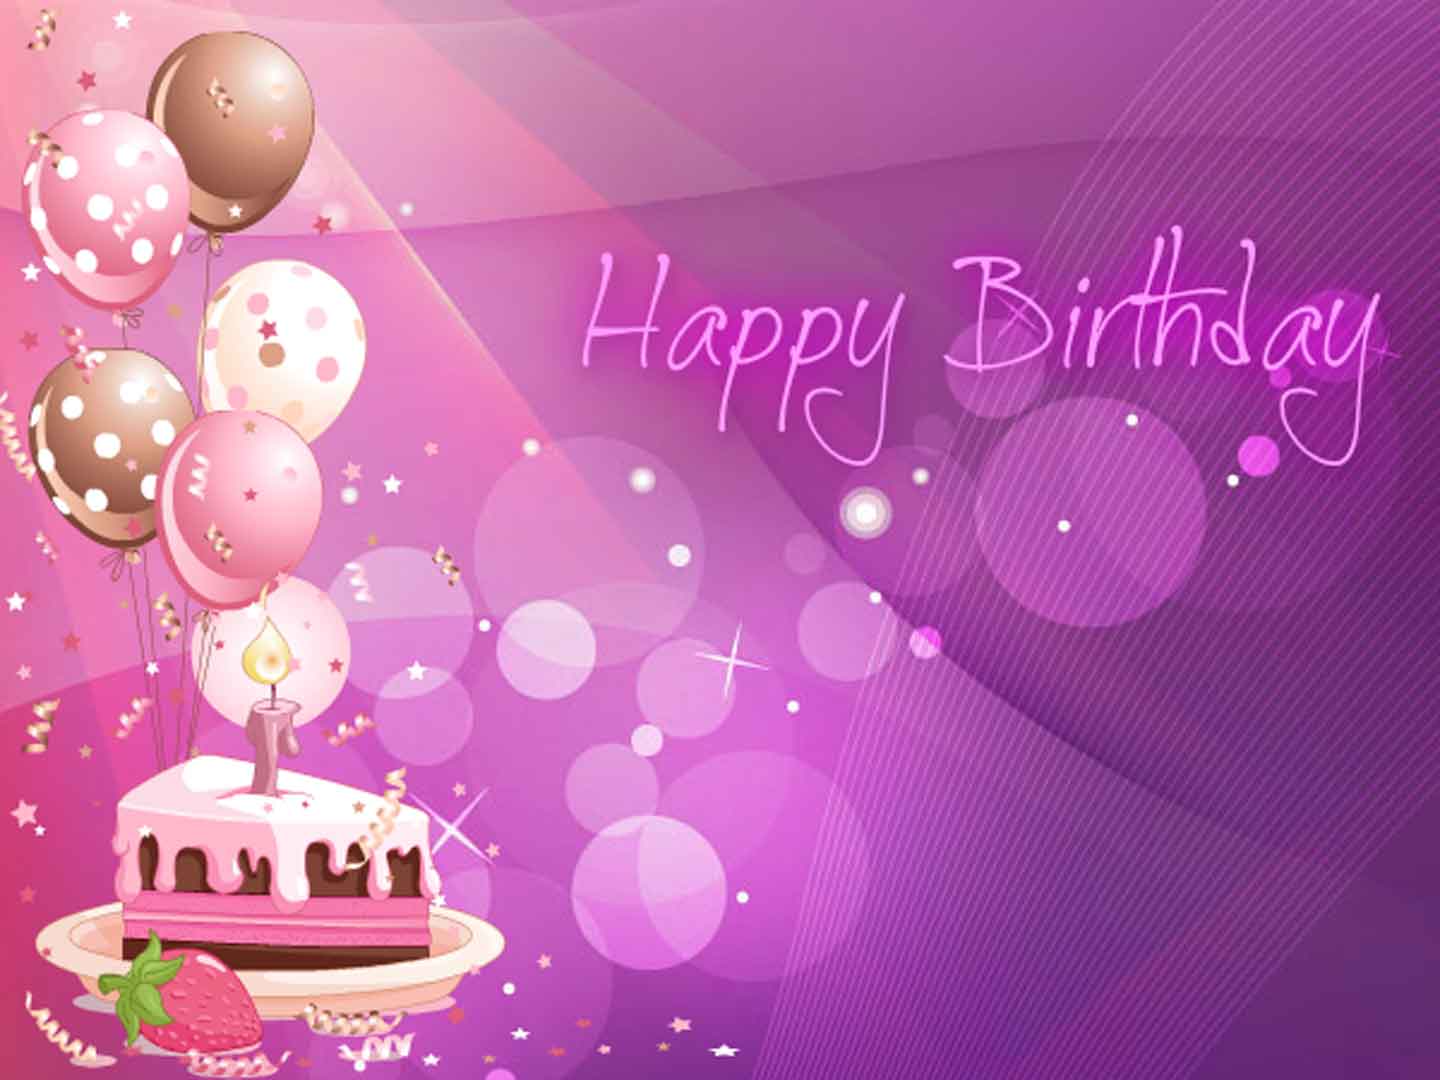 Wallpapers Of Happy Birthday 1440x1080